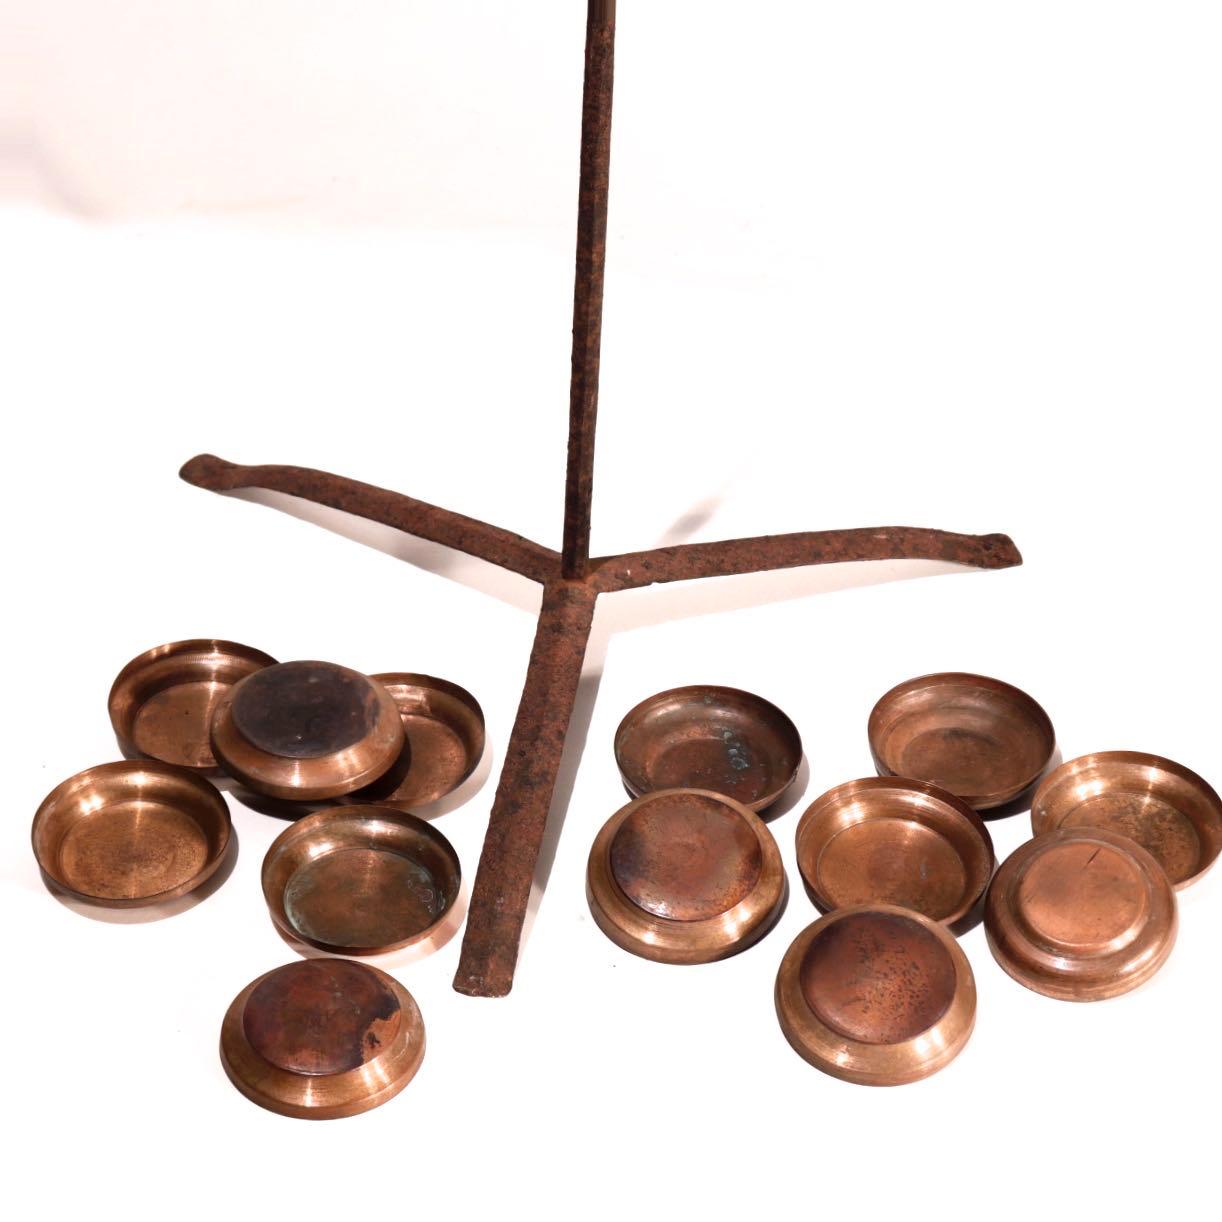 Japanese Iron Tomyodai with Copper Oil Dishes In Good Condition For Sale In Point Richmond, CA